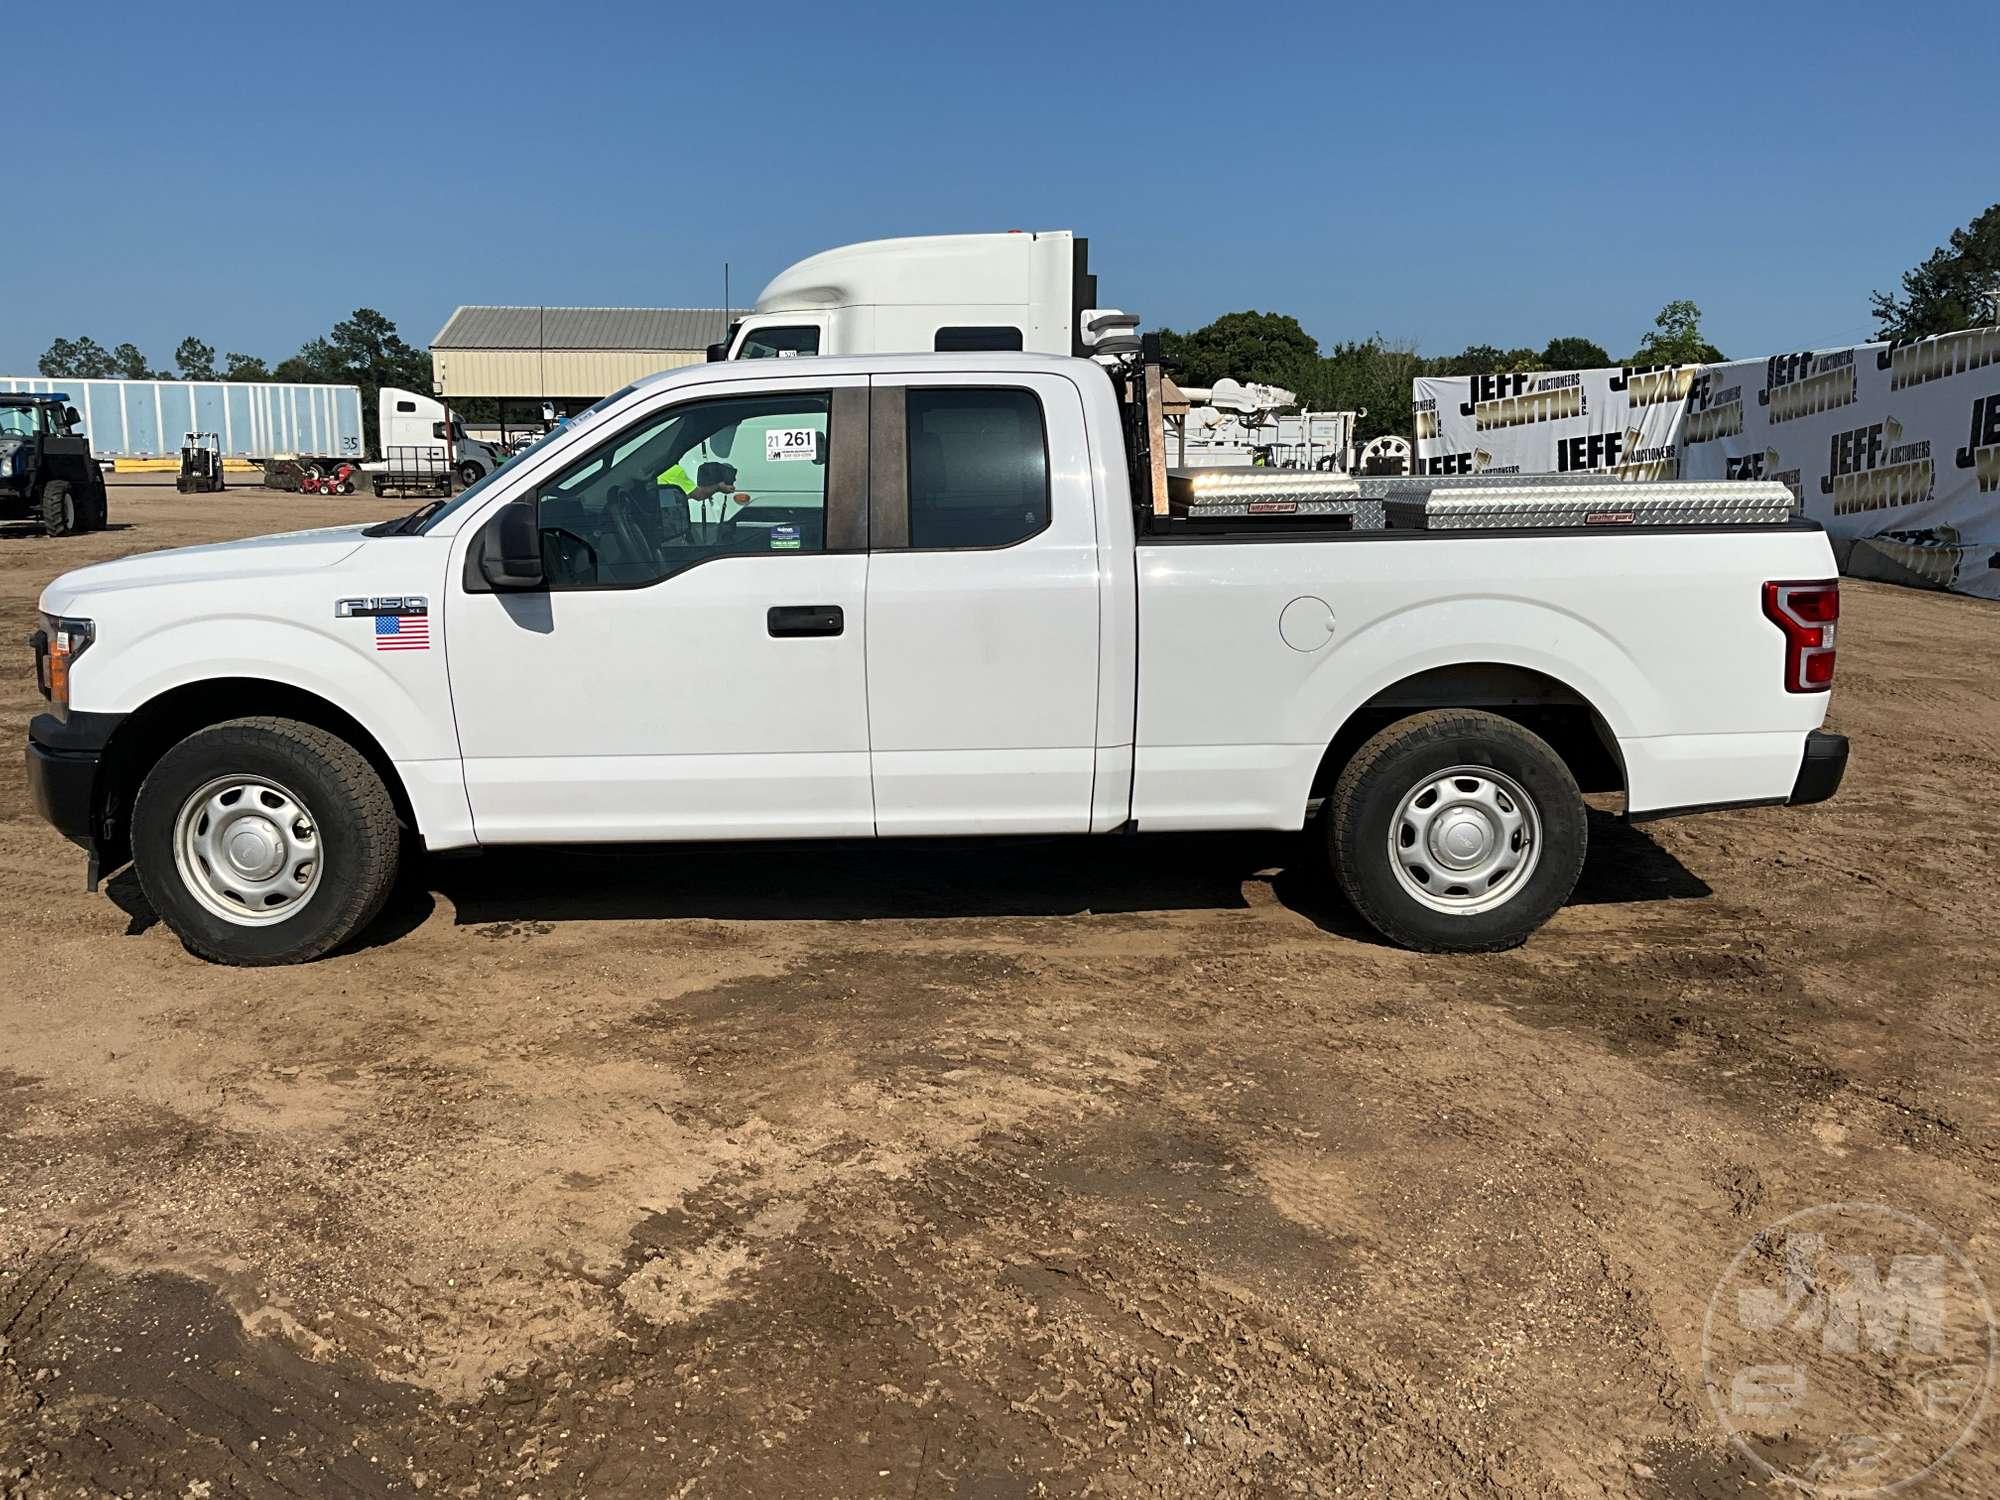 2019 FORD F-150 XL EXTENDED CAB PICKUP VIN: 1FTEX1C57KKD85062